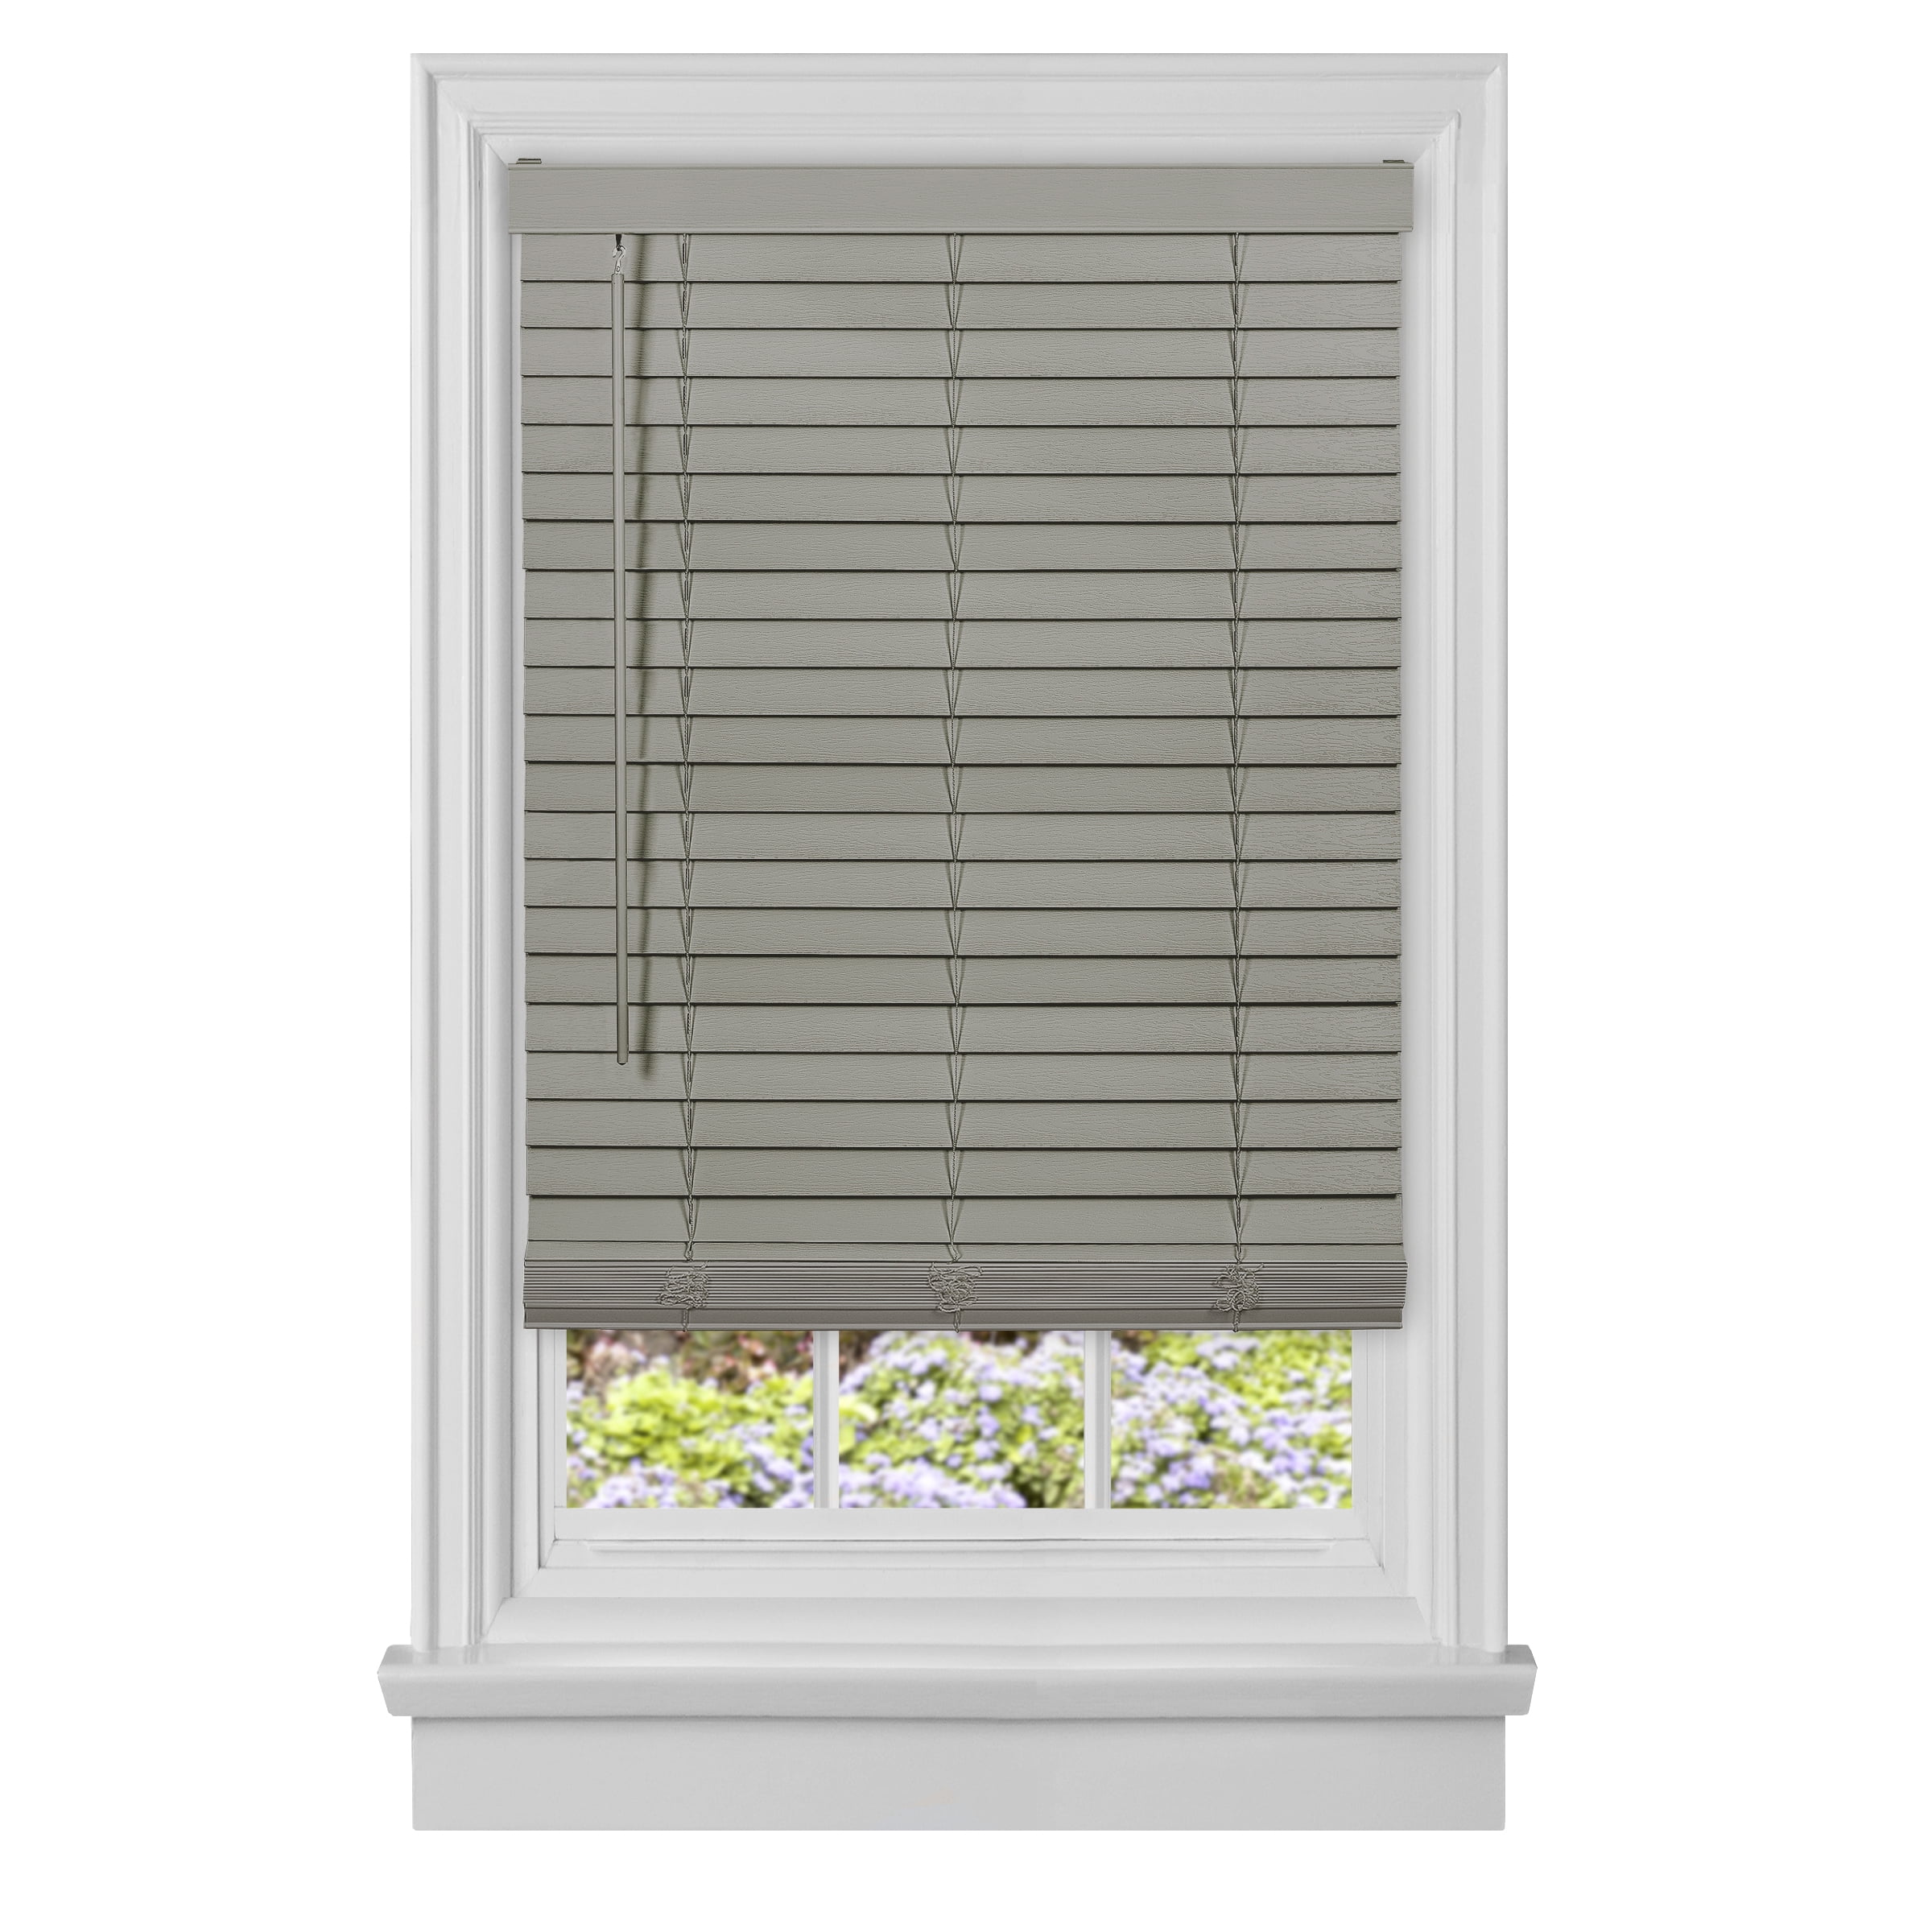 Picture of Achim MFG236GY02 36 x 64 in. Cordless GII Madera Falsa 2 in. Faux Wood Plantation Blind - Grey